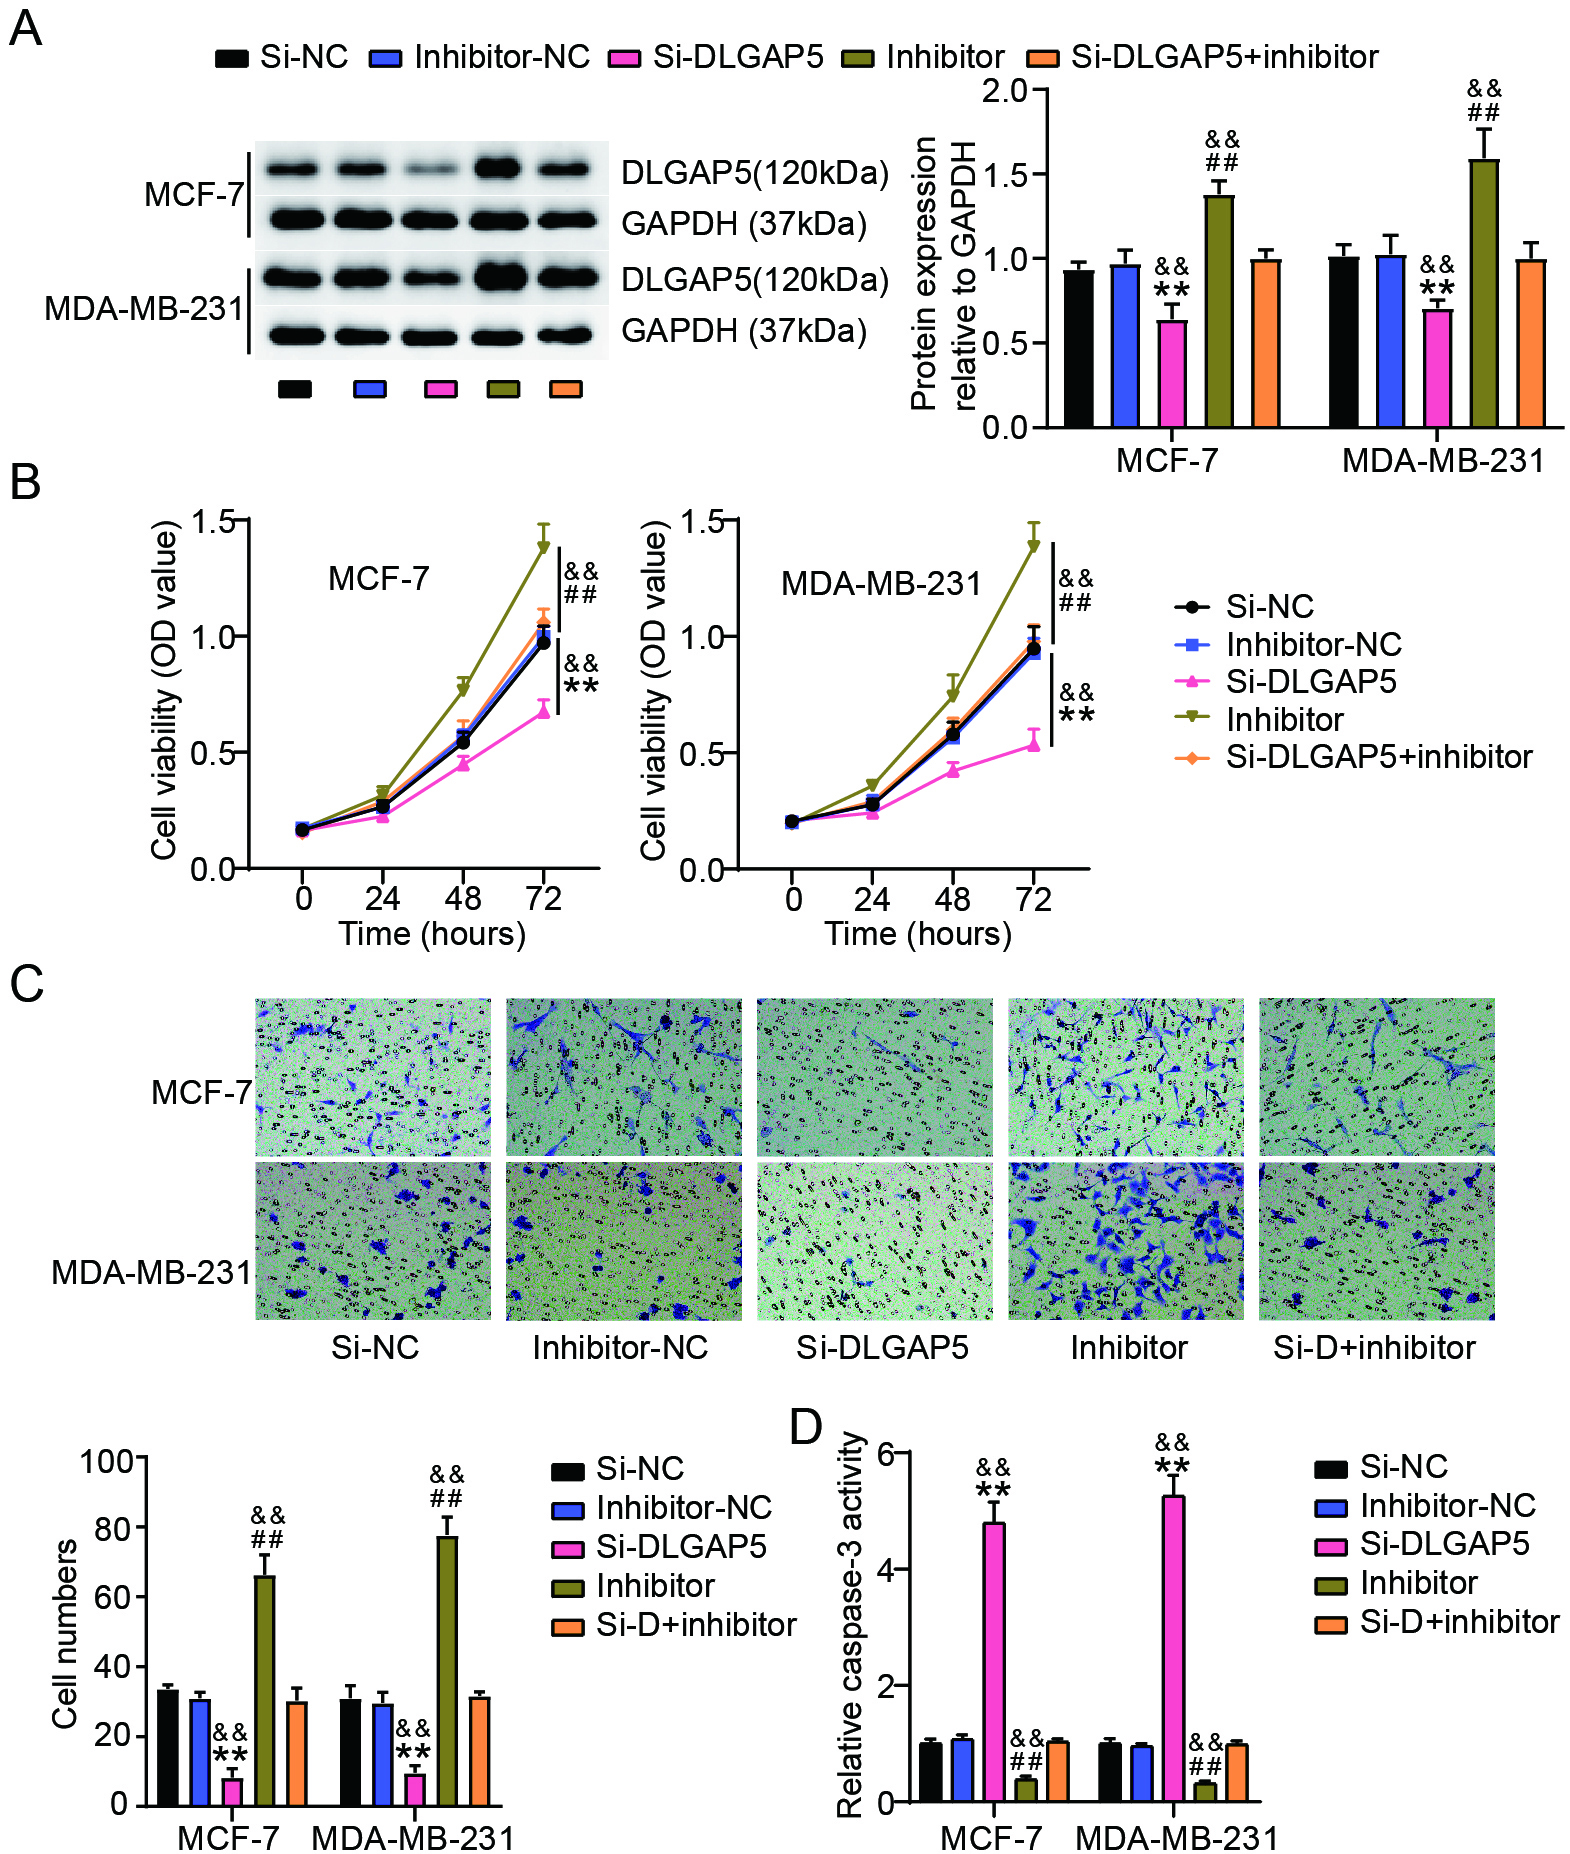 miR-557 repressed the proliferation and migration of BC cells while suppressed cell apoptosis by downregulating DLGAP5 expression. (A) Results of western blot study of DLGAP5 expressions in MDA-MB-231 as well as MCF-7 cells after transfection of si-NC, si-DLGAP5, miR-557 inhibitor (inhibitor), inhibitor-NC or si-DLGAP5+inhibitor. (B) To quantify the proliferation of these transfected MDA-MB-231 cells as well as MCF-7, the CCK-8 test was used. (C) To monitor the migration of these transfected MDA-MB-231 and MCF-7 cells, a transwell test was performed. (D) Employing a capase-3 activity test, caspase-3 levels in these transfected MDA-MB-231 as well as MCF-7 cells were evaluated. ##P< 0.001 vs. inhibitor-NC; **P< 0.001 vs. Si-NC; &&P< 0.001 vs. Si-DLGAP5+inhibitor. Si-DLGAP5: Si-D.